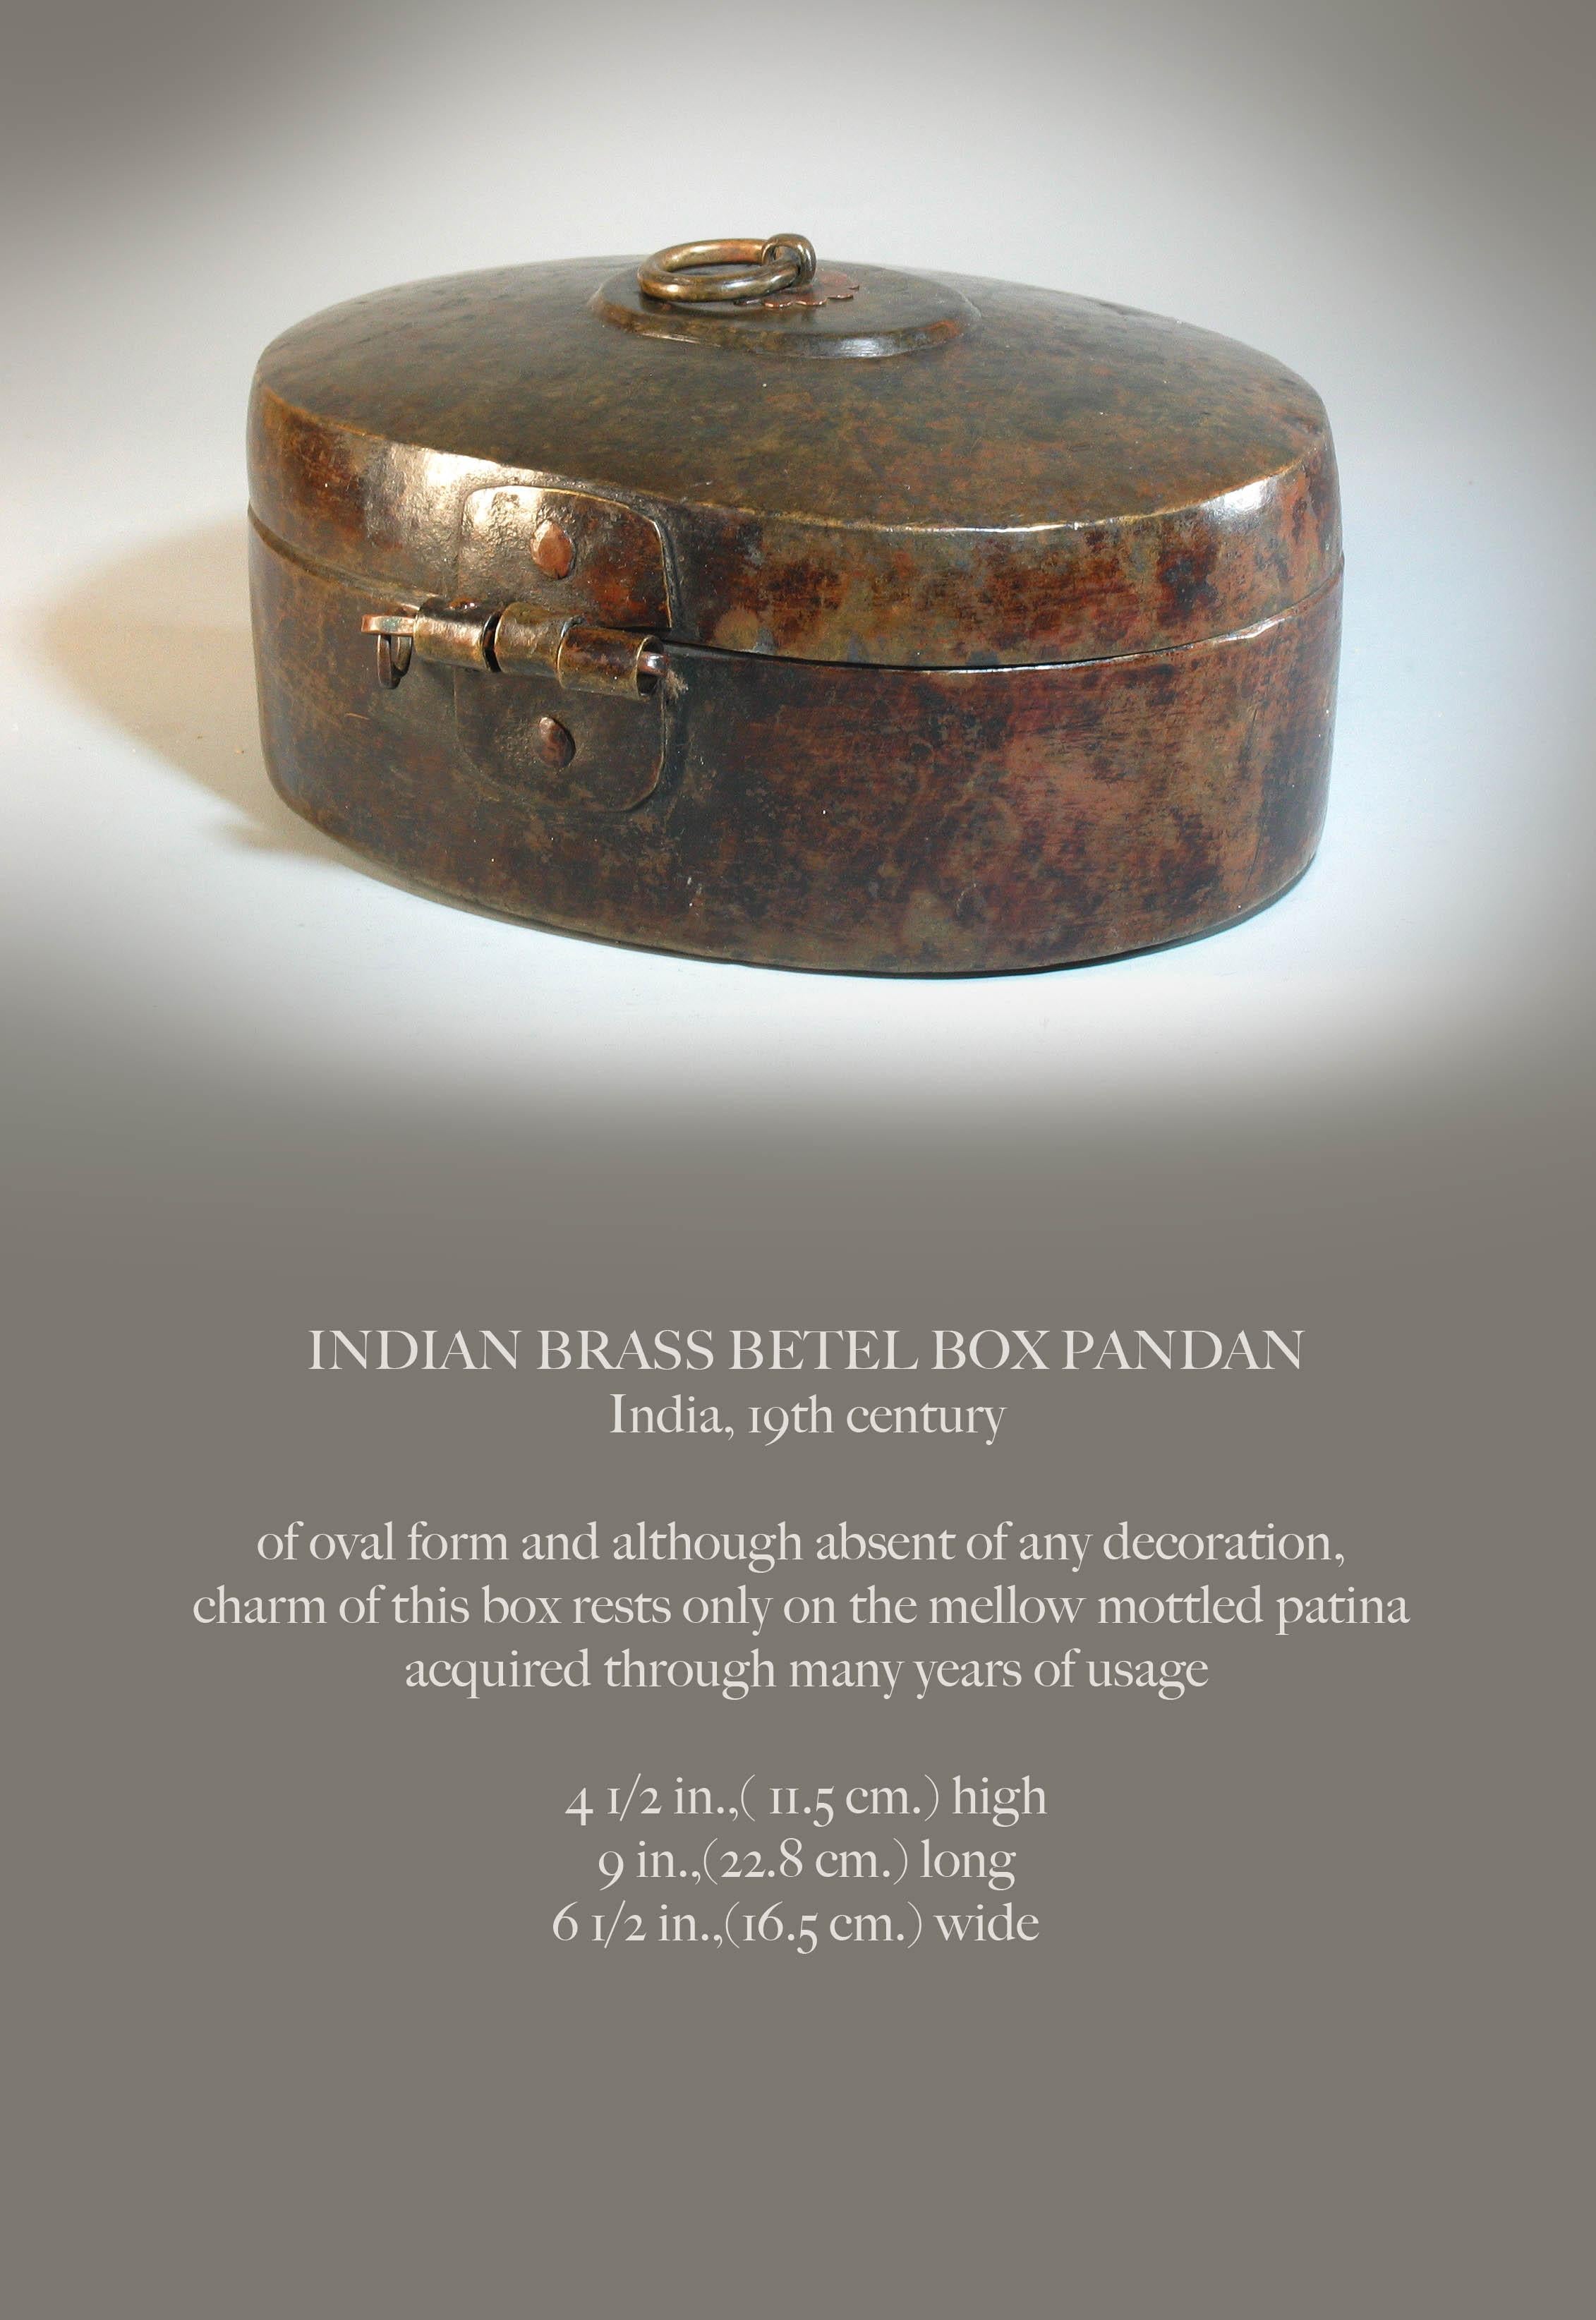 Indian brass betel box pandan
India, 19th century.

Of oval form and although absent of any decoration, 
charm of this box rests only on the mellow mottled patina 
acquired through many years of usage.

Measures: 4 1/2 in.,( 11.5 cm.)